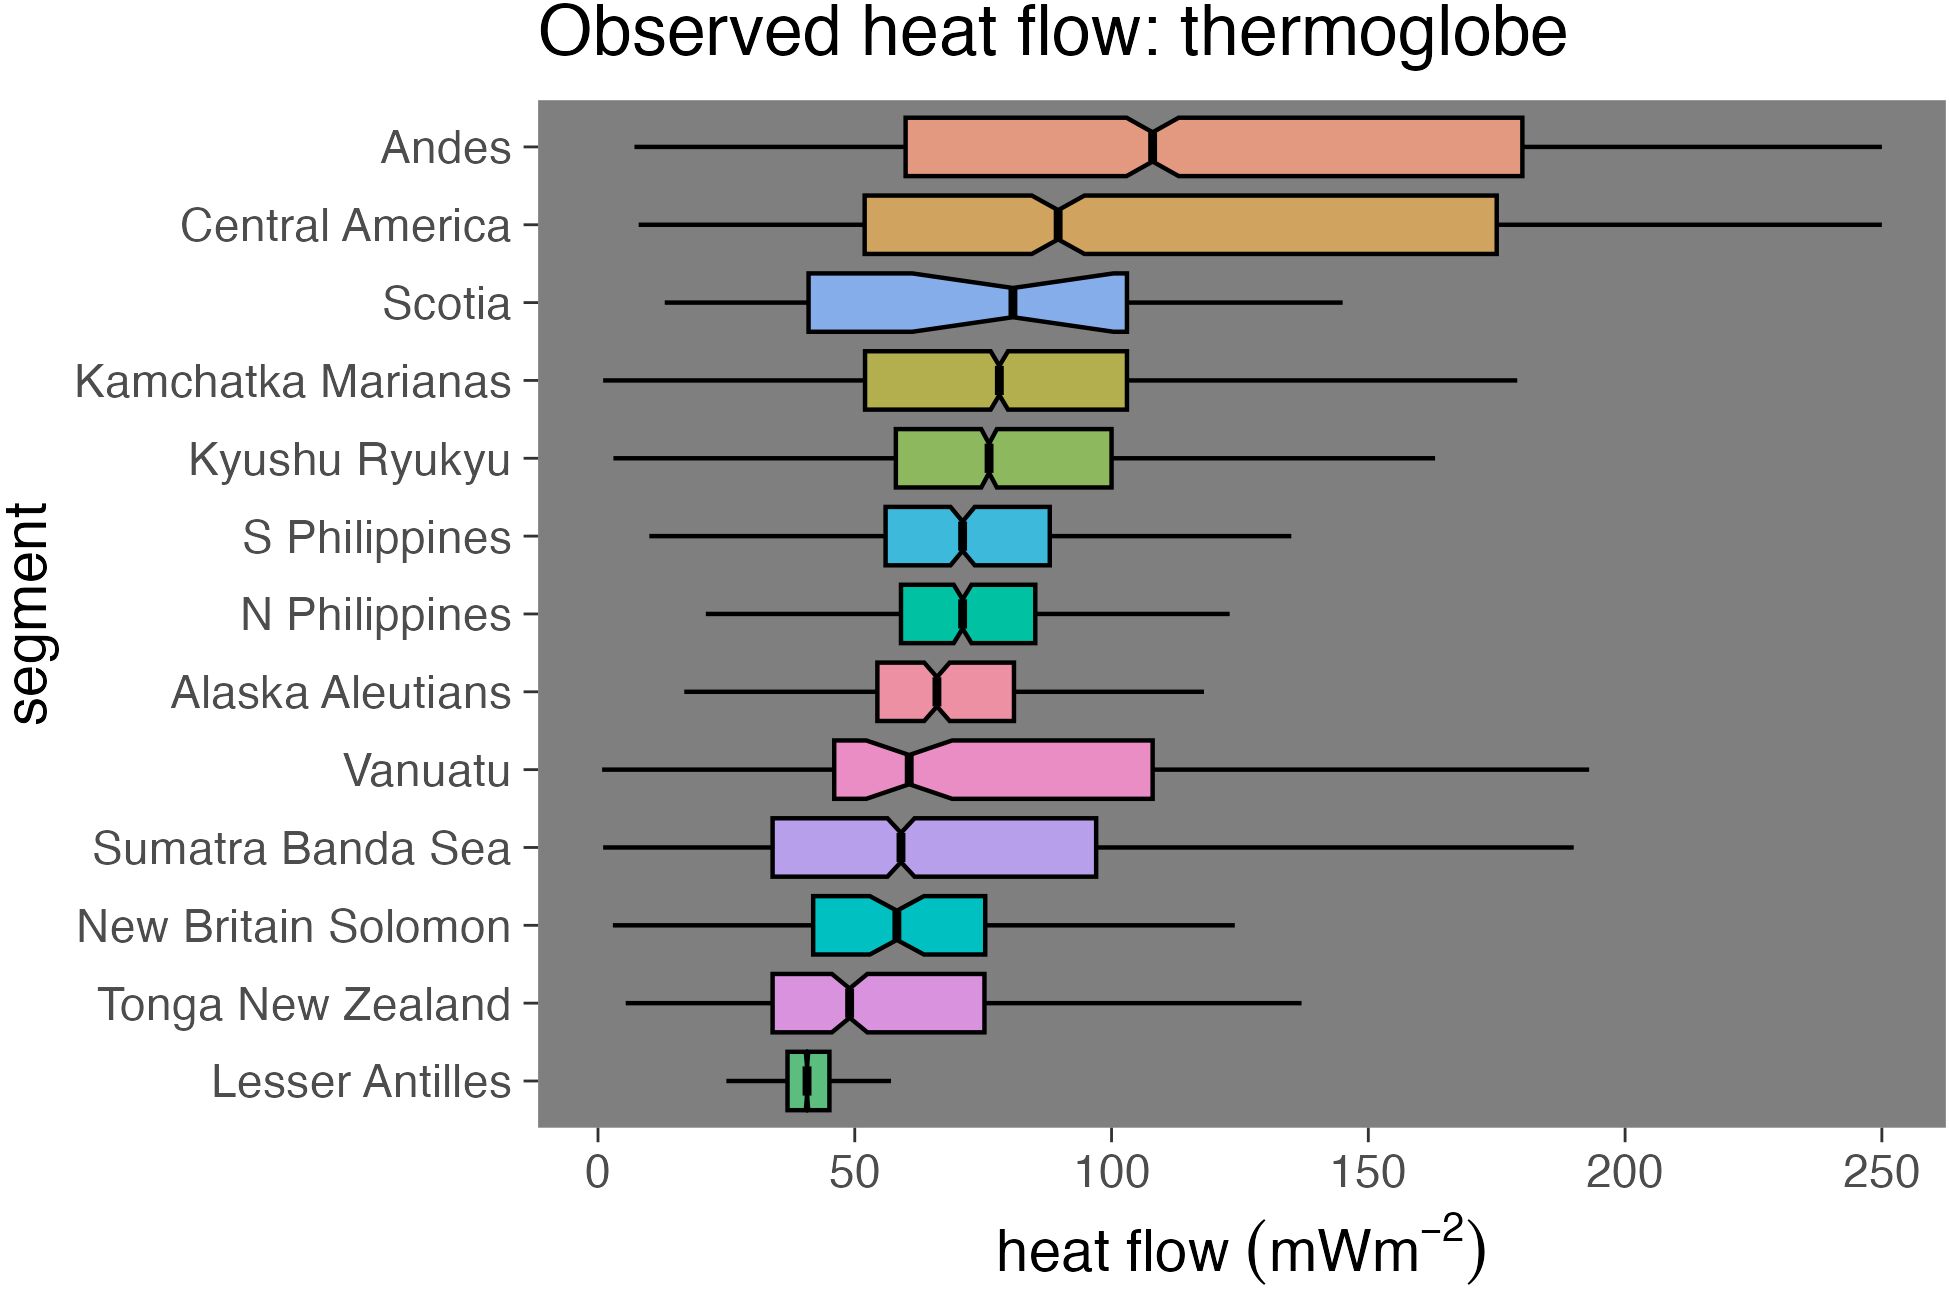 Distribution of ThermoGlobe observations from Lucazeau (2019) cropped within 1000 km-radius buffers around 13 active subduction zone segments. Heat flow distributions are centered between 41 and 108 mW/m\(^2\), generally right-skewed, and irregularly distributed. Skewness reflects near-surface perturbations from geothermal systems and tectonic regions with high thermal activity while irregularity reflects complex heat exchange acting across multiple spatial scales from 10\(^-1\) to 10\(^3\) km.